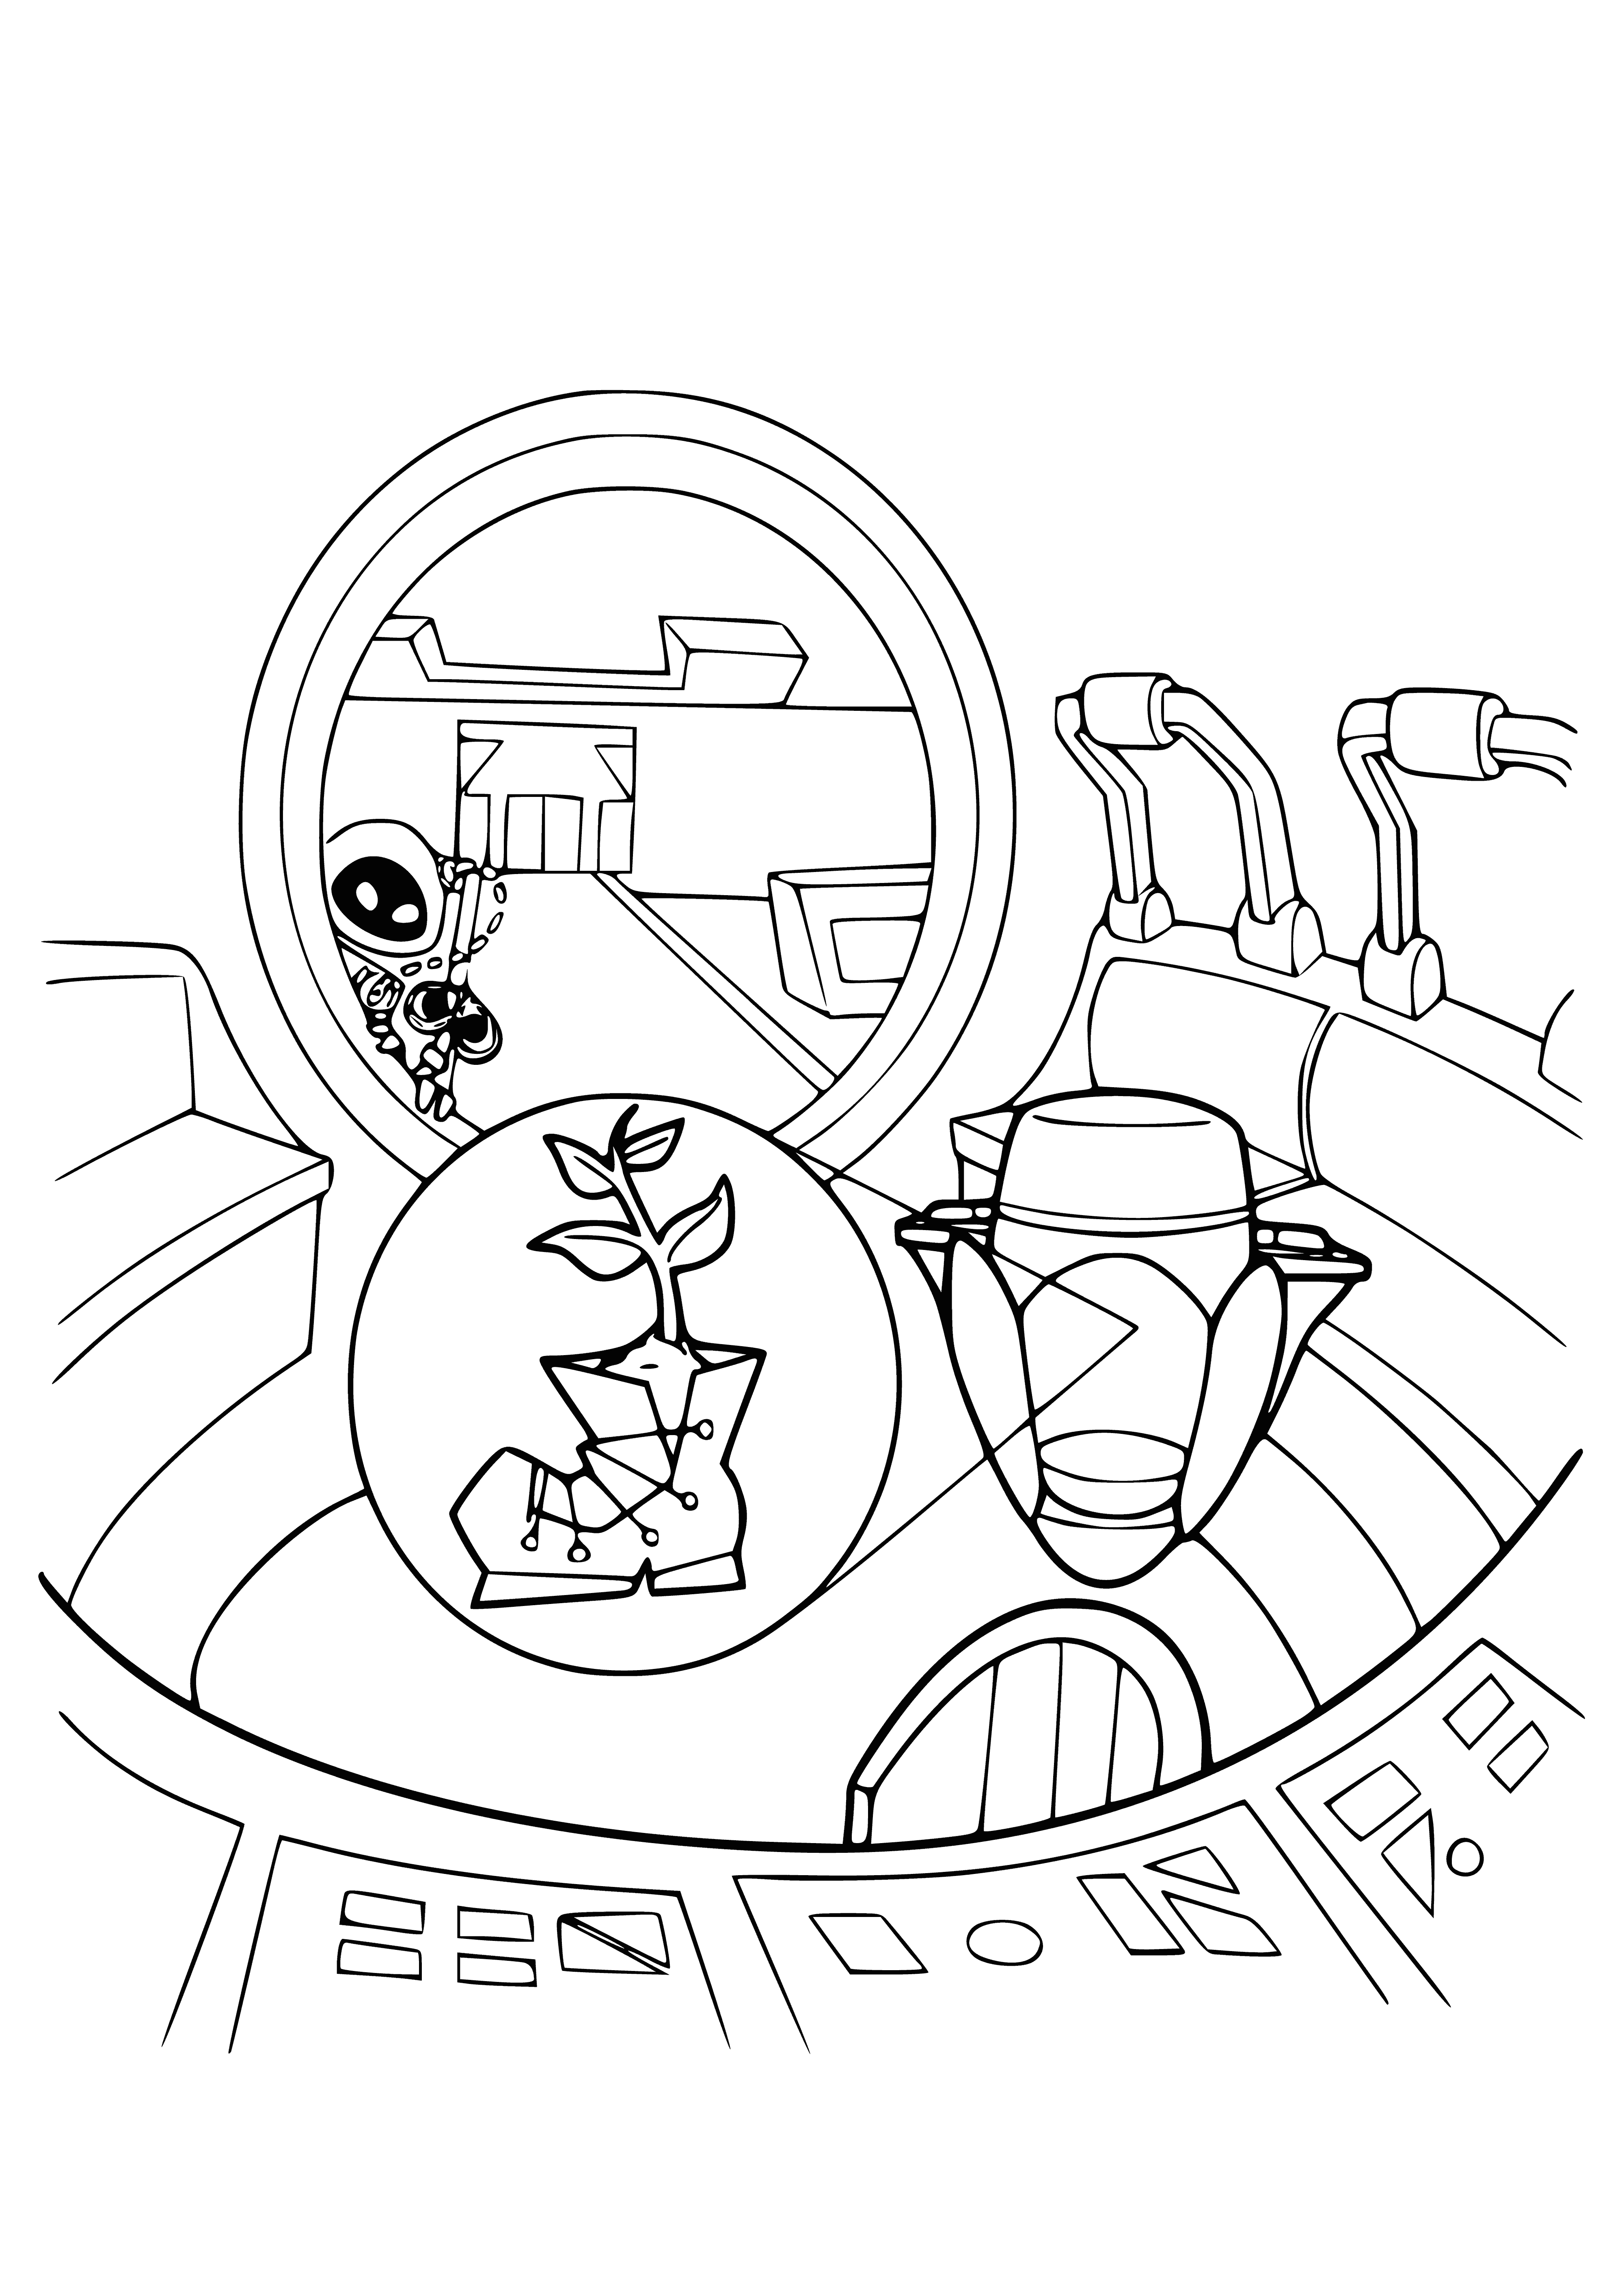 coloring page: Space shuttle rescues Wall-e in space; Wall-e returns safely to Earth.